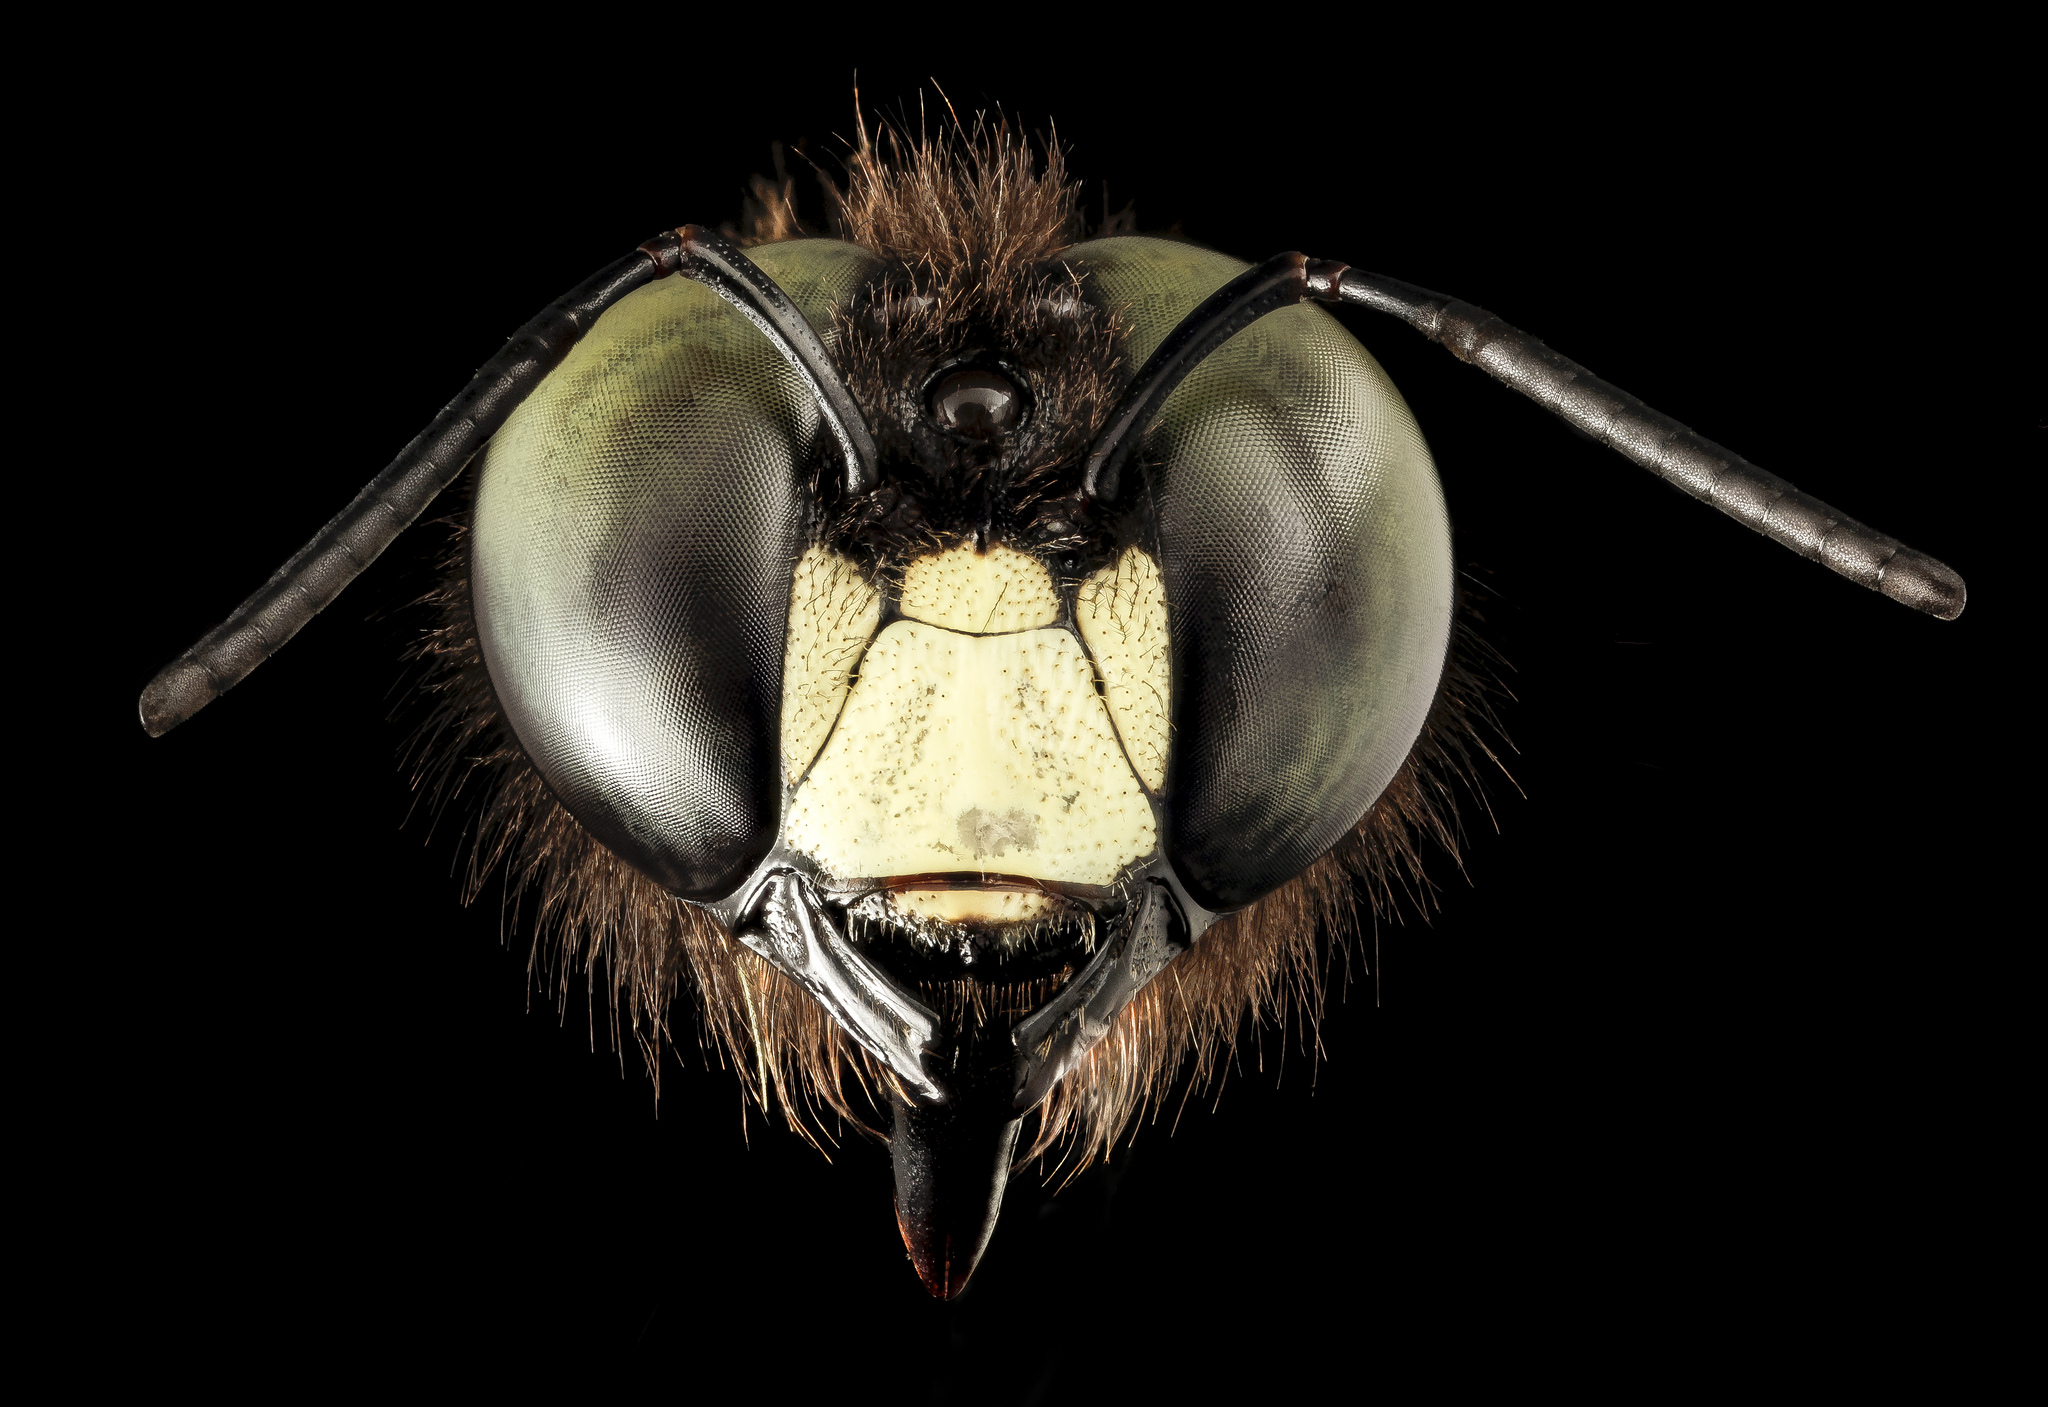 These Exquisite Bee Photographs Reveal Every Delicate Hair, Antenna, And Wing